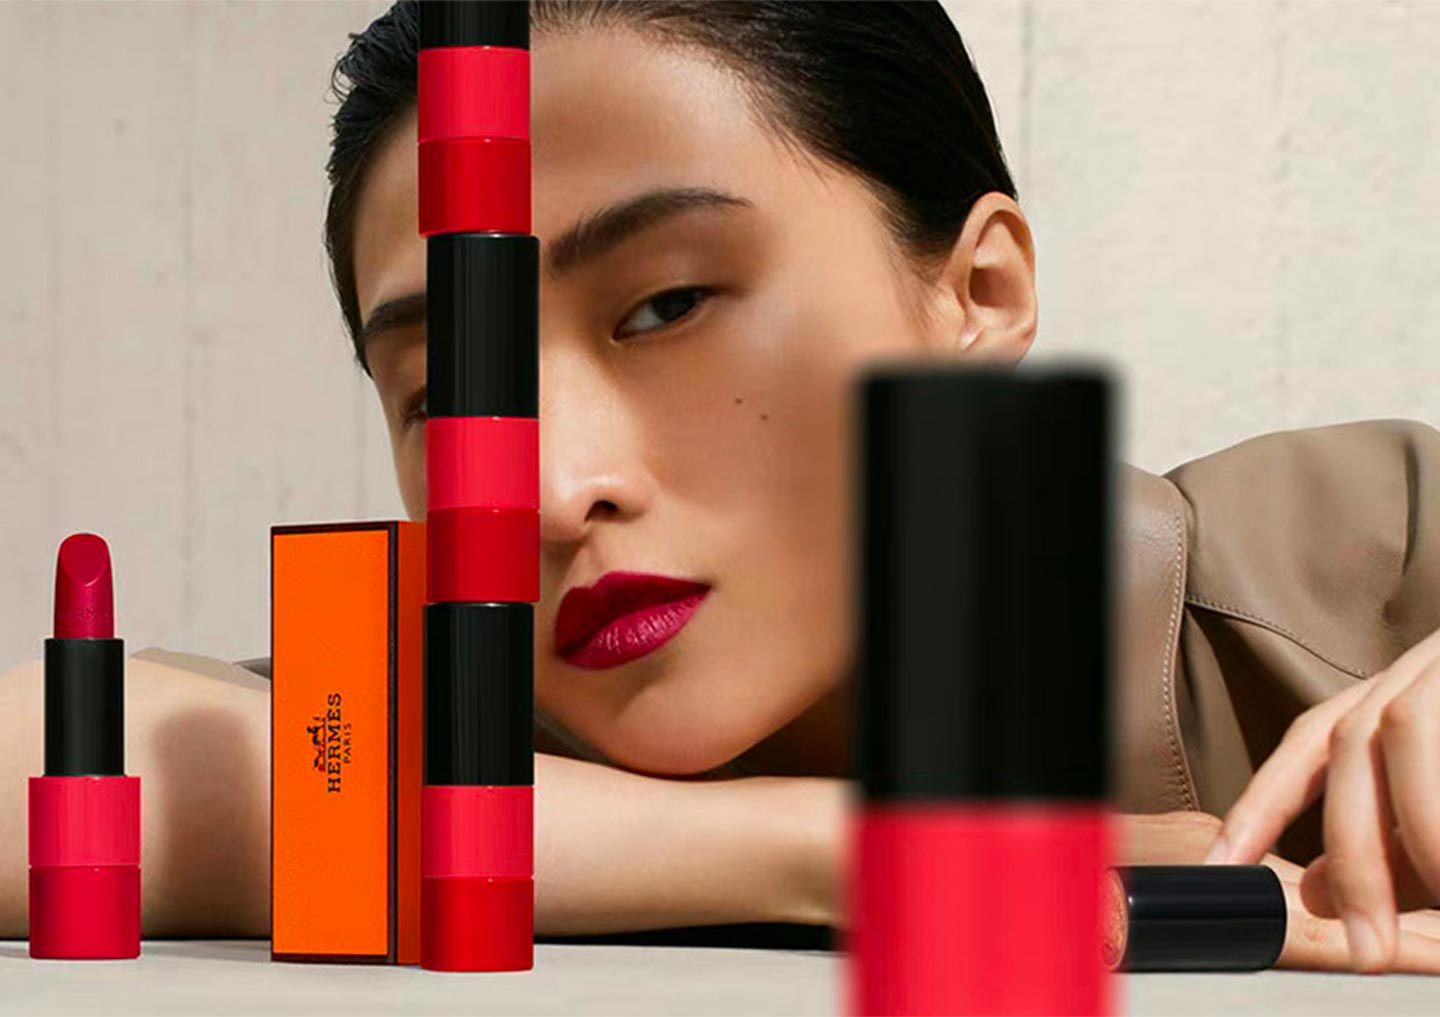 Hermès continues to expand its beauty offering